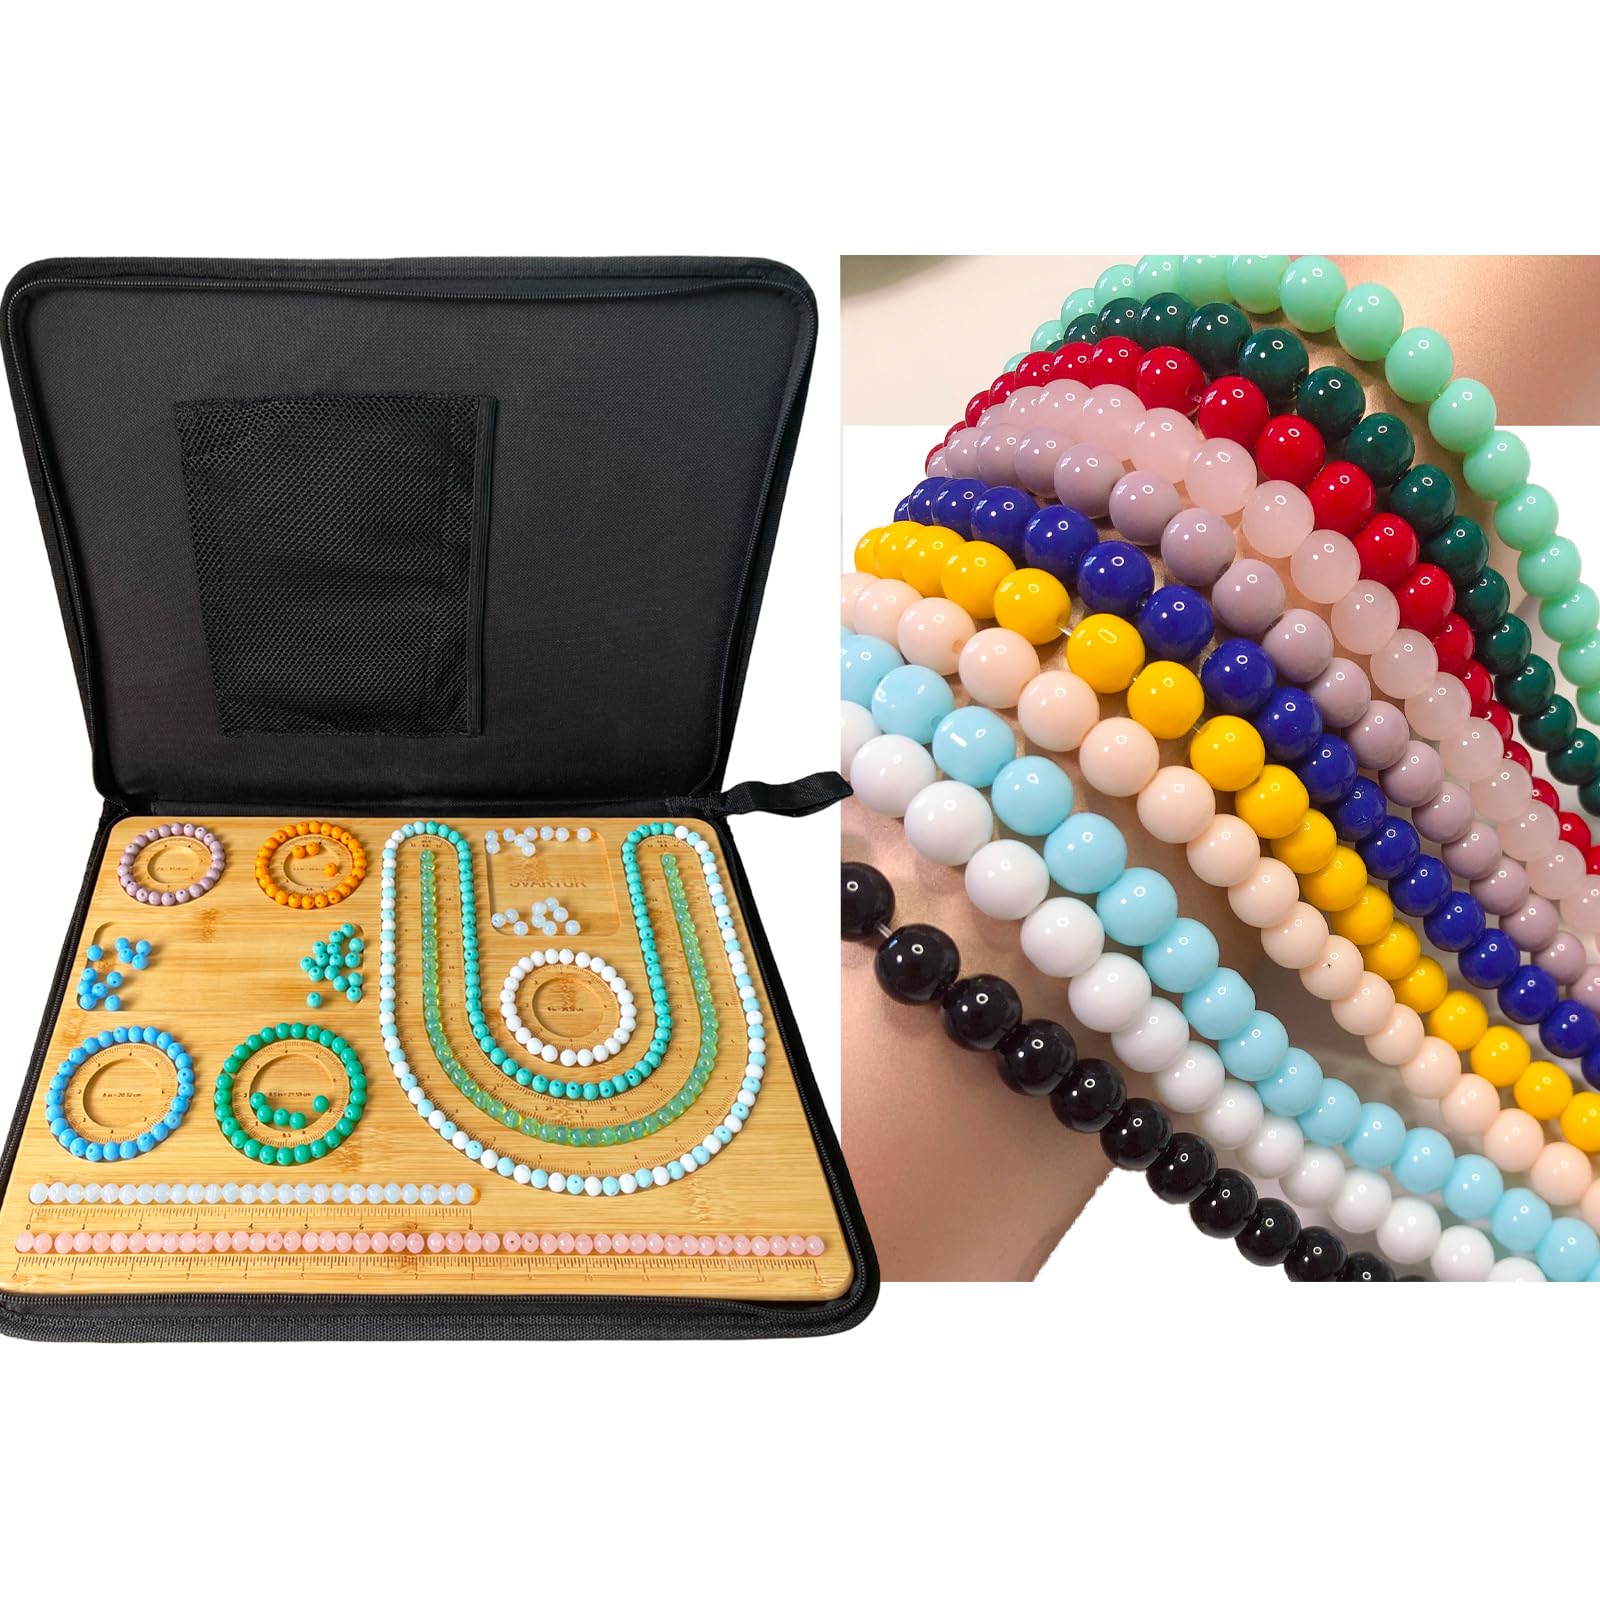 Svartur Bead Board with Beads, 1200 Pcs 8mm Glass Beads & Bead Board with case, Complete Jewelry Making Beading Set